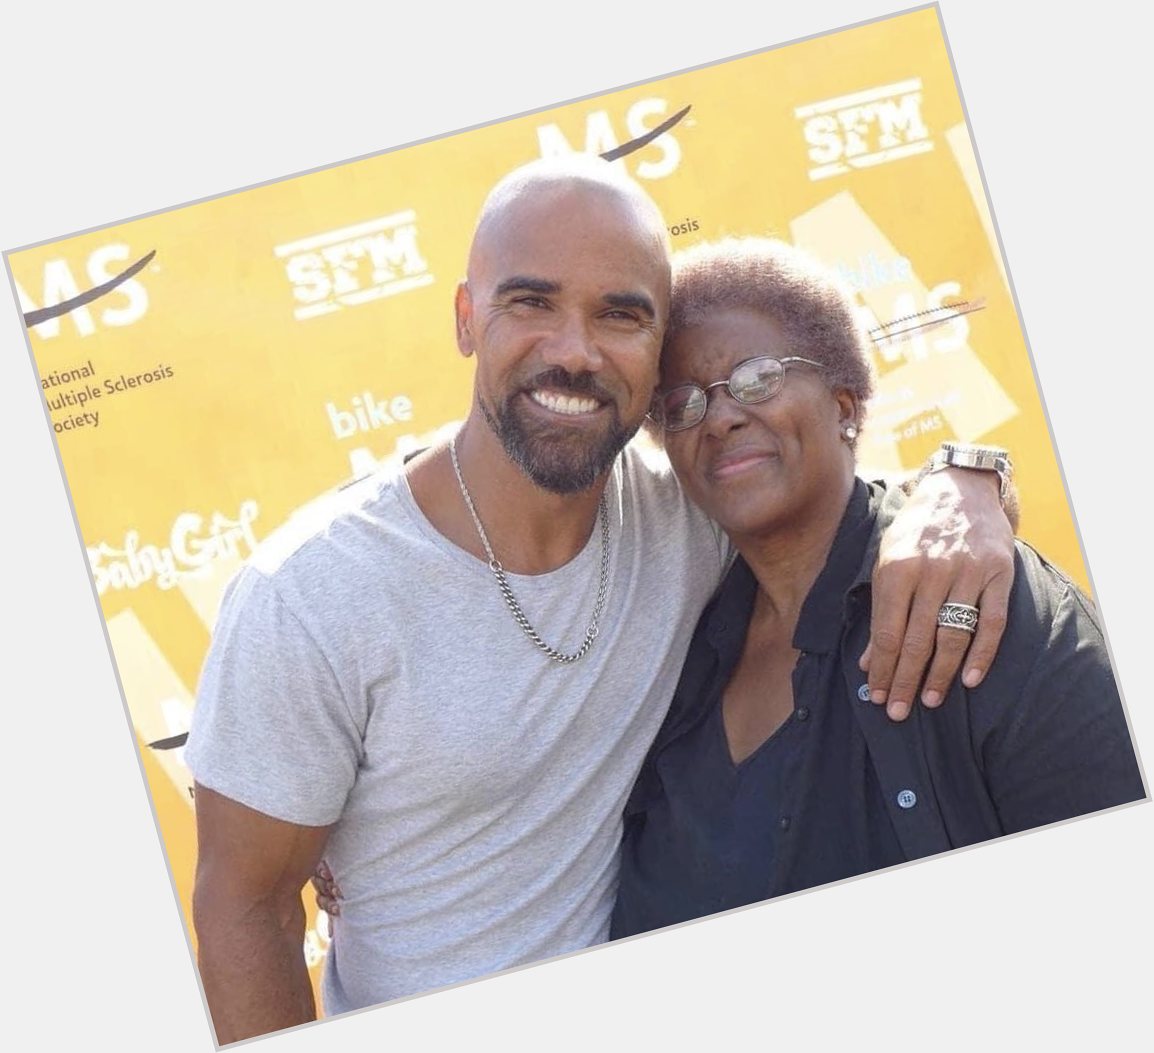 Happy Birthday today to Shemar Moore. I have been a fan since The Young and the Restless. 